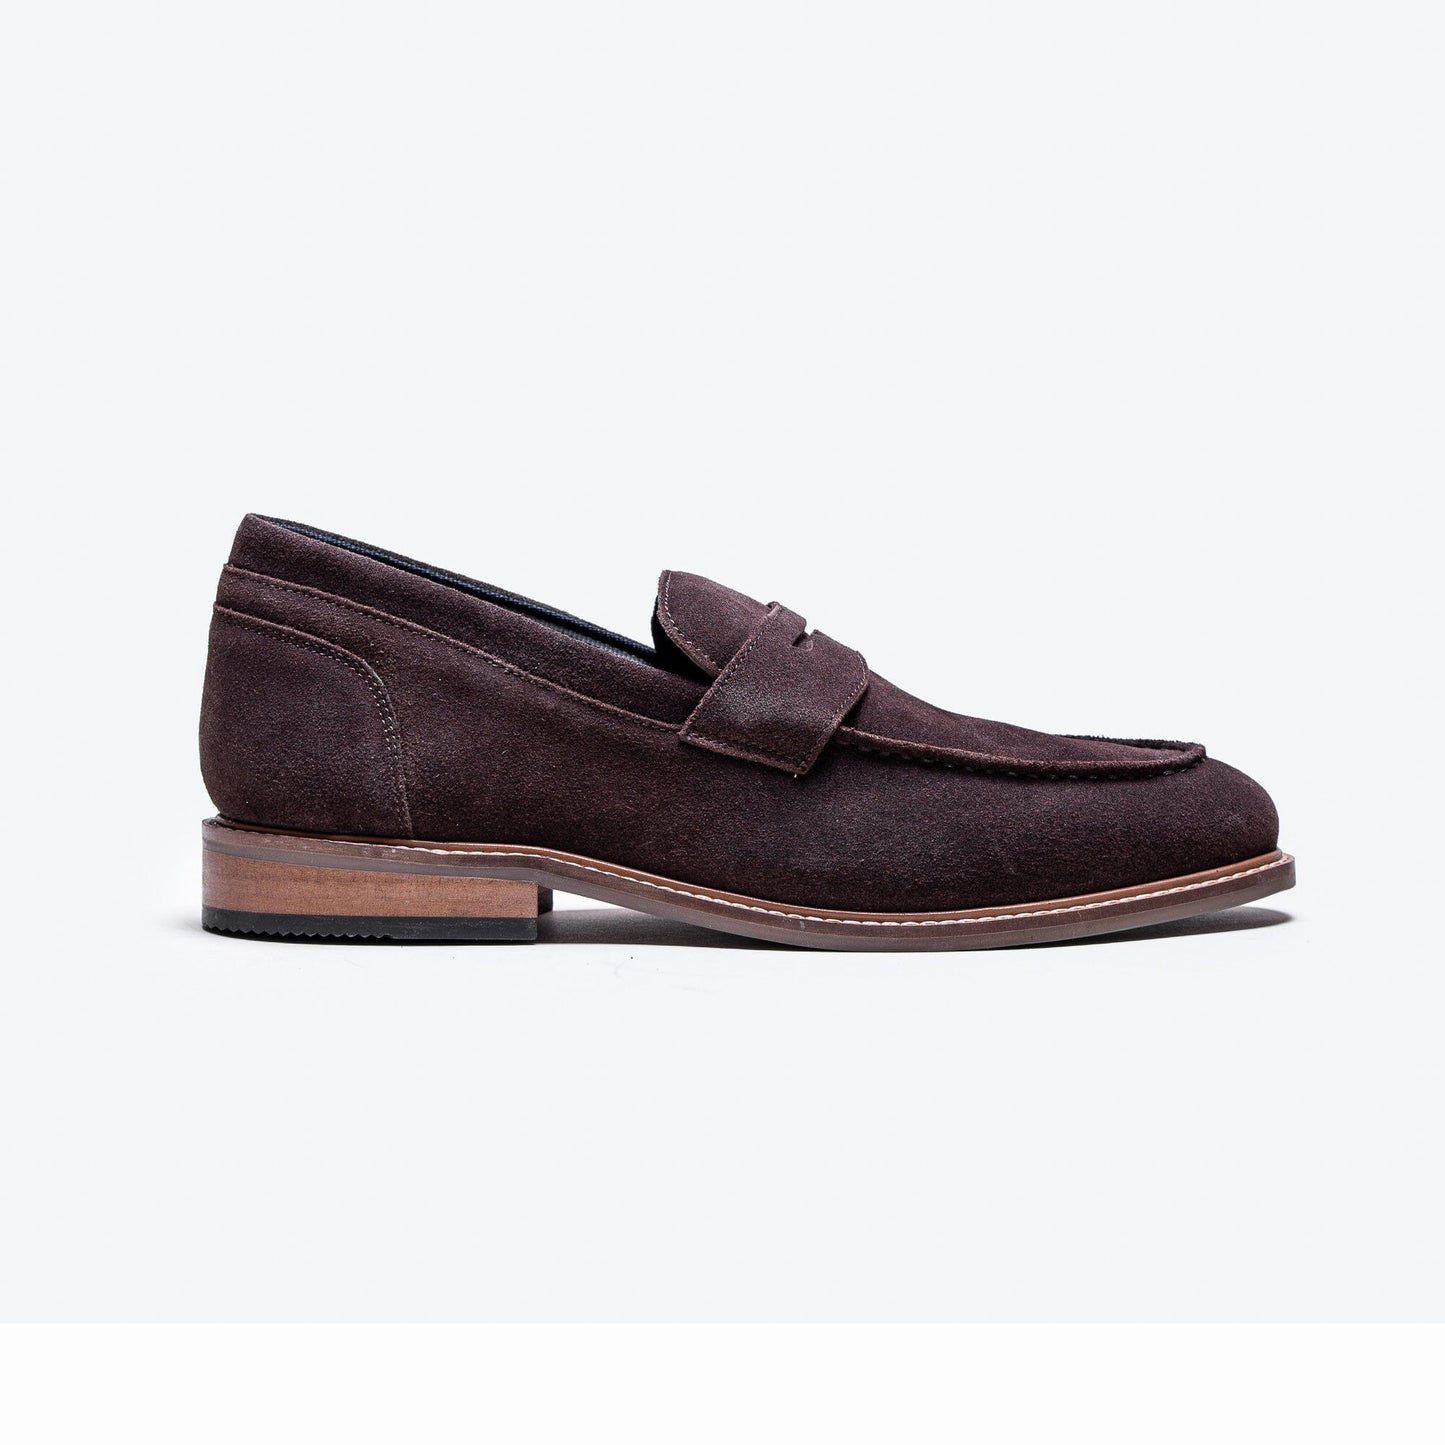 Jordan Brown Suede Loafers - Shoes - 7 - THREADPEPPER